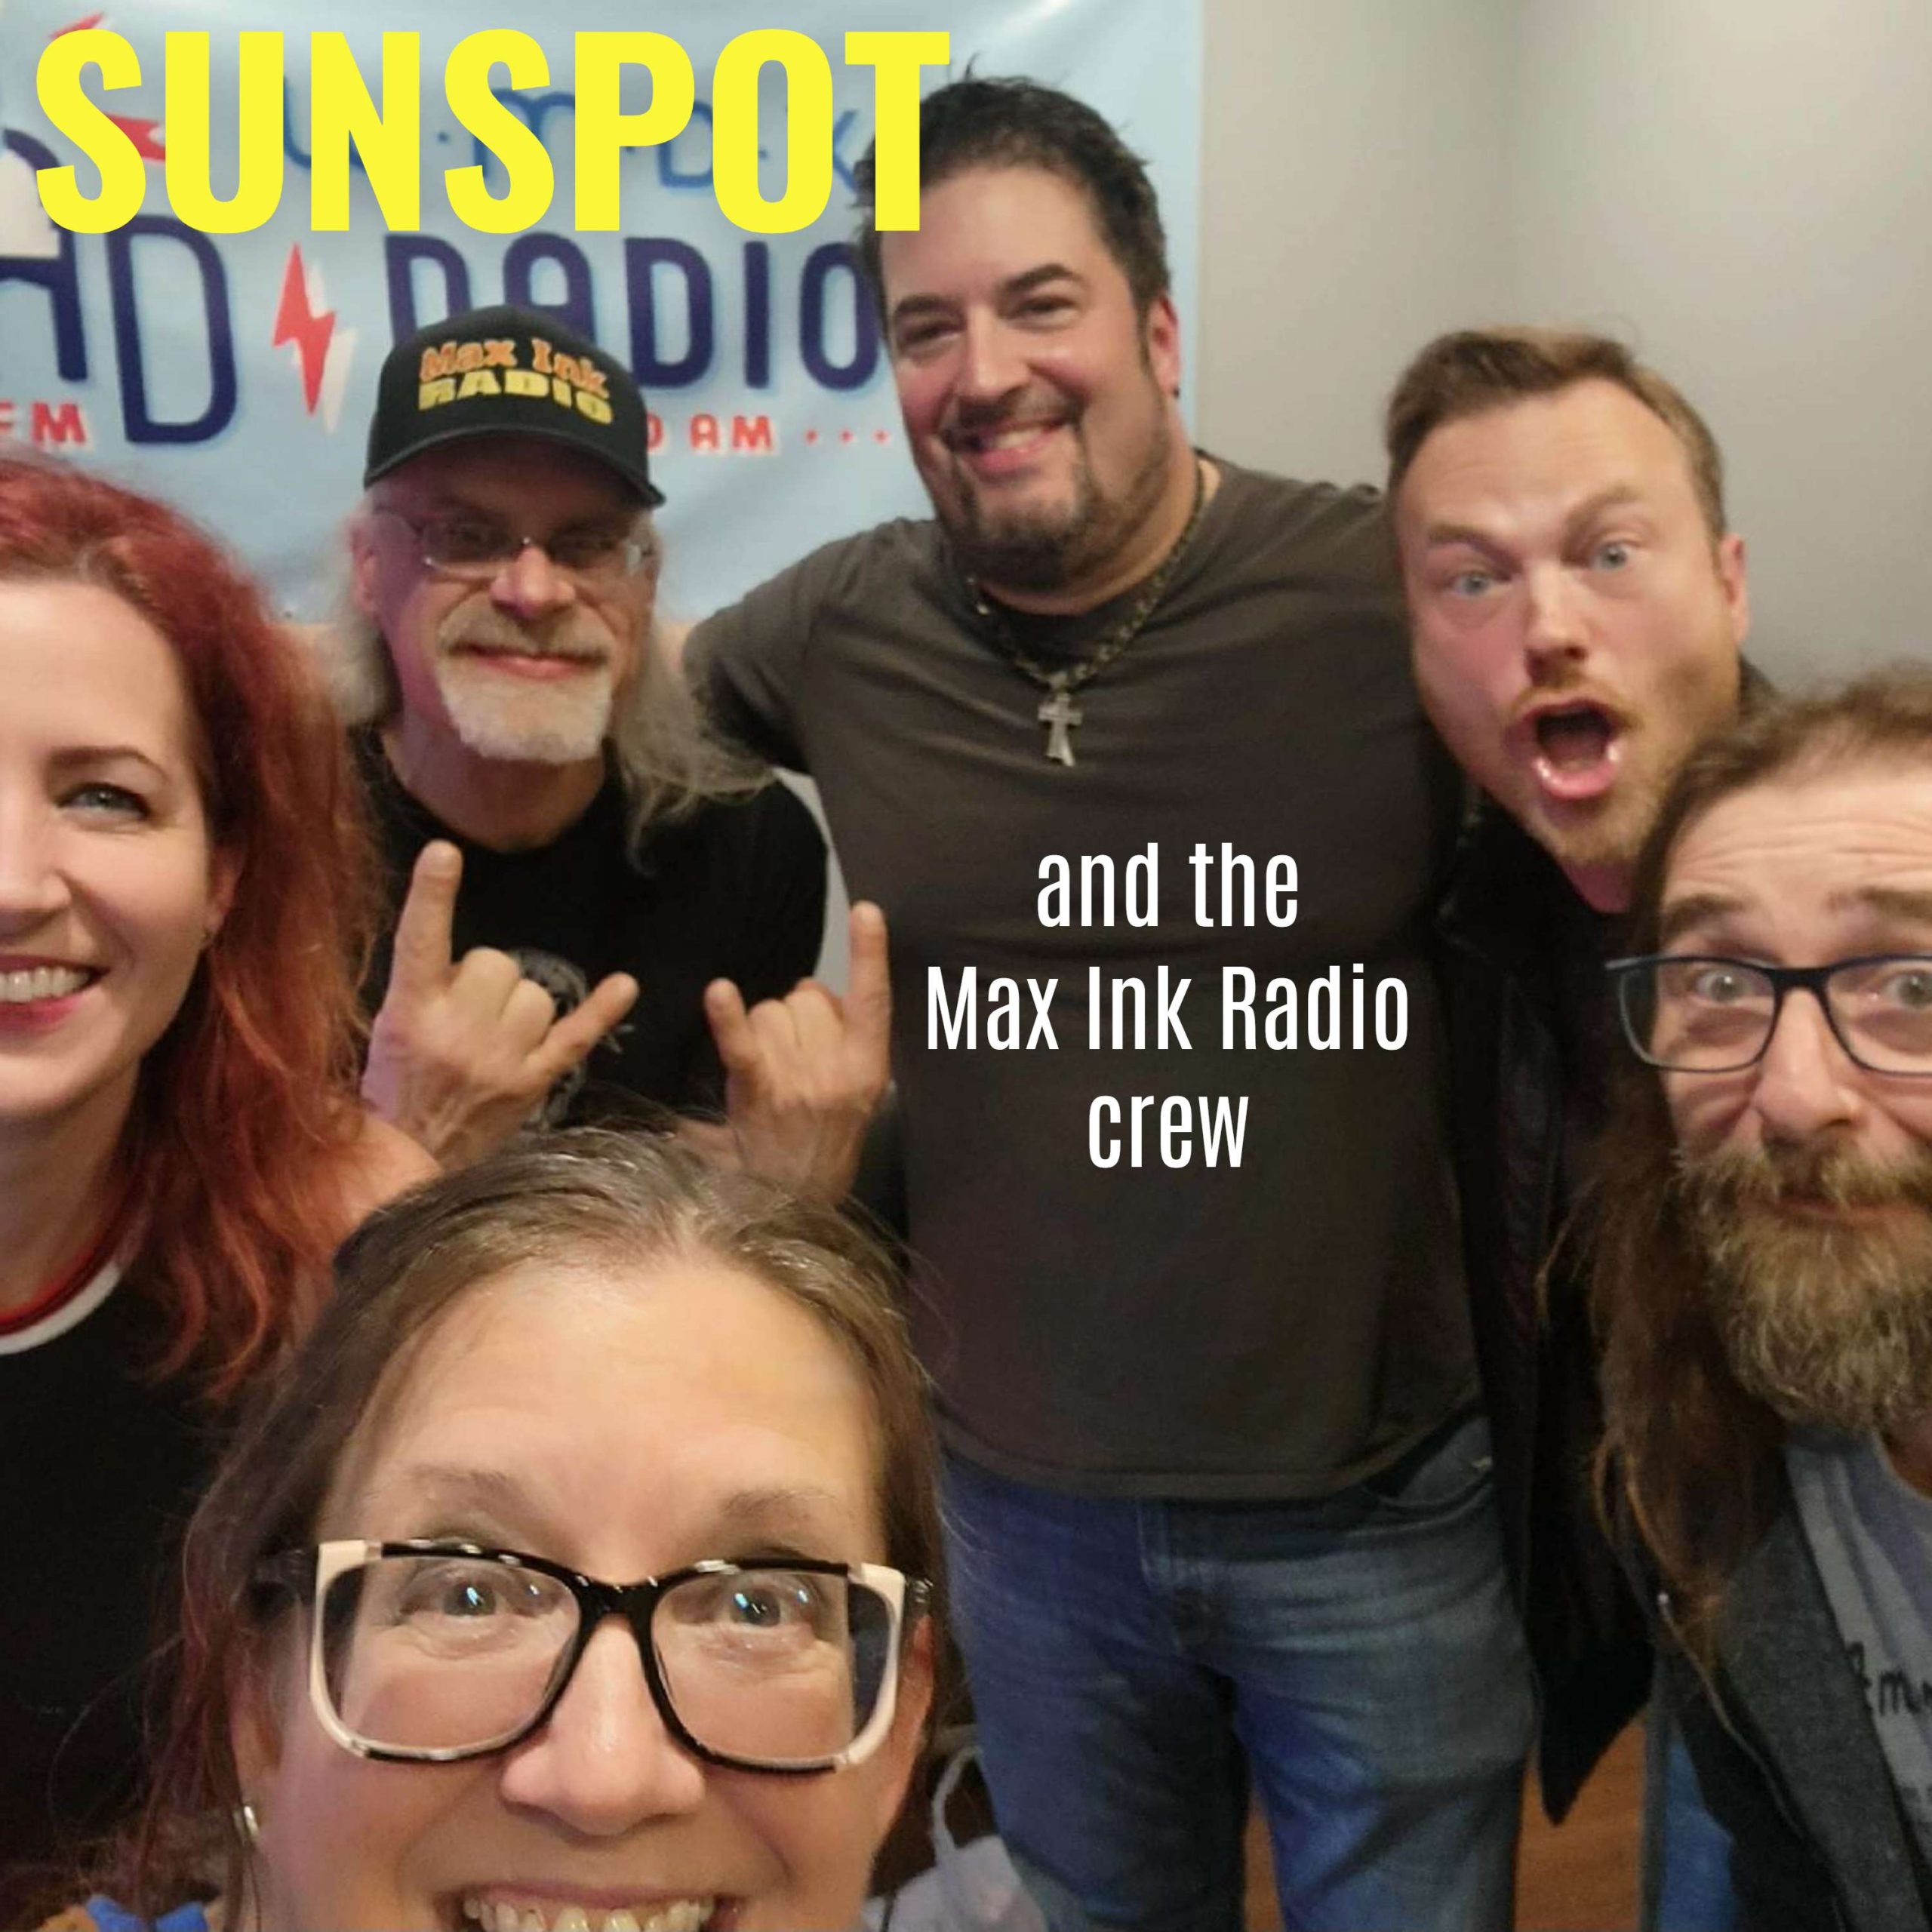 Sunspot and the Max Ink Radio crew: L-R Wendy, Rökker, Ben, Mike, Jimmy, Teri